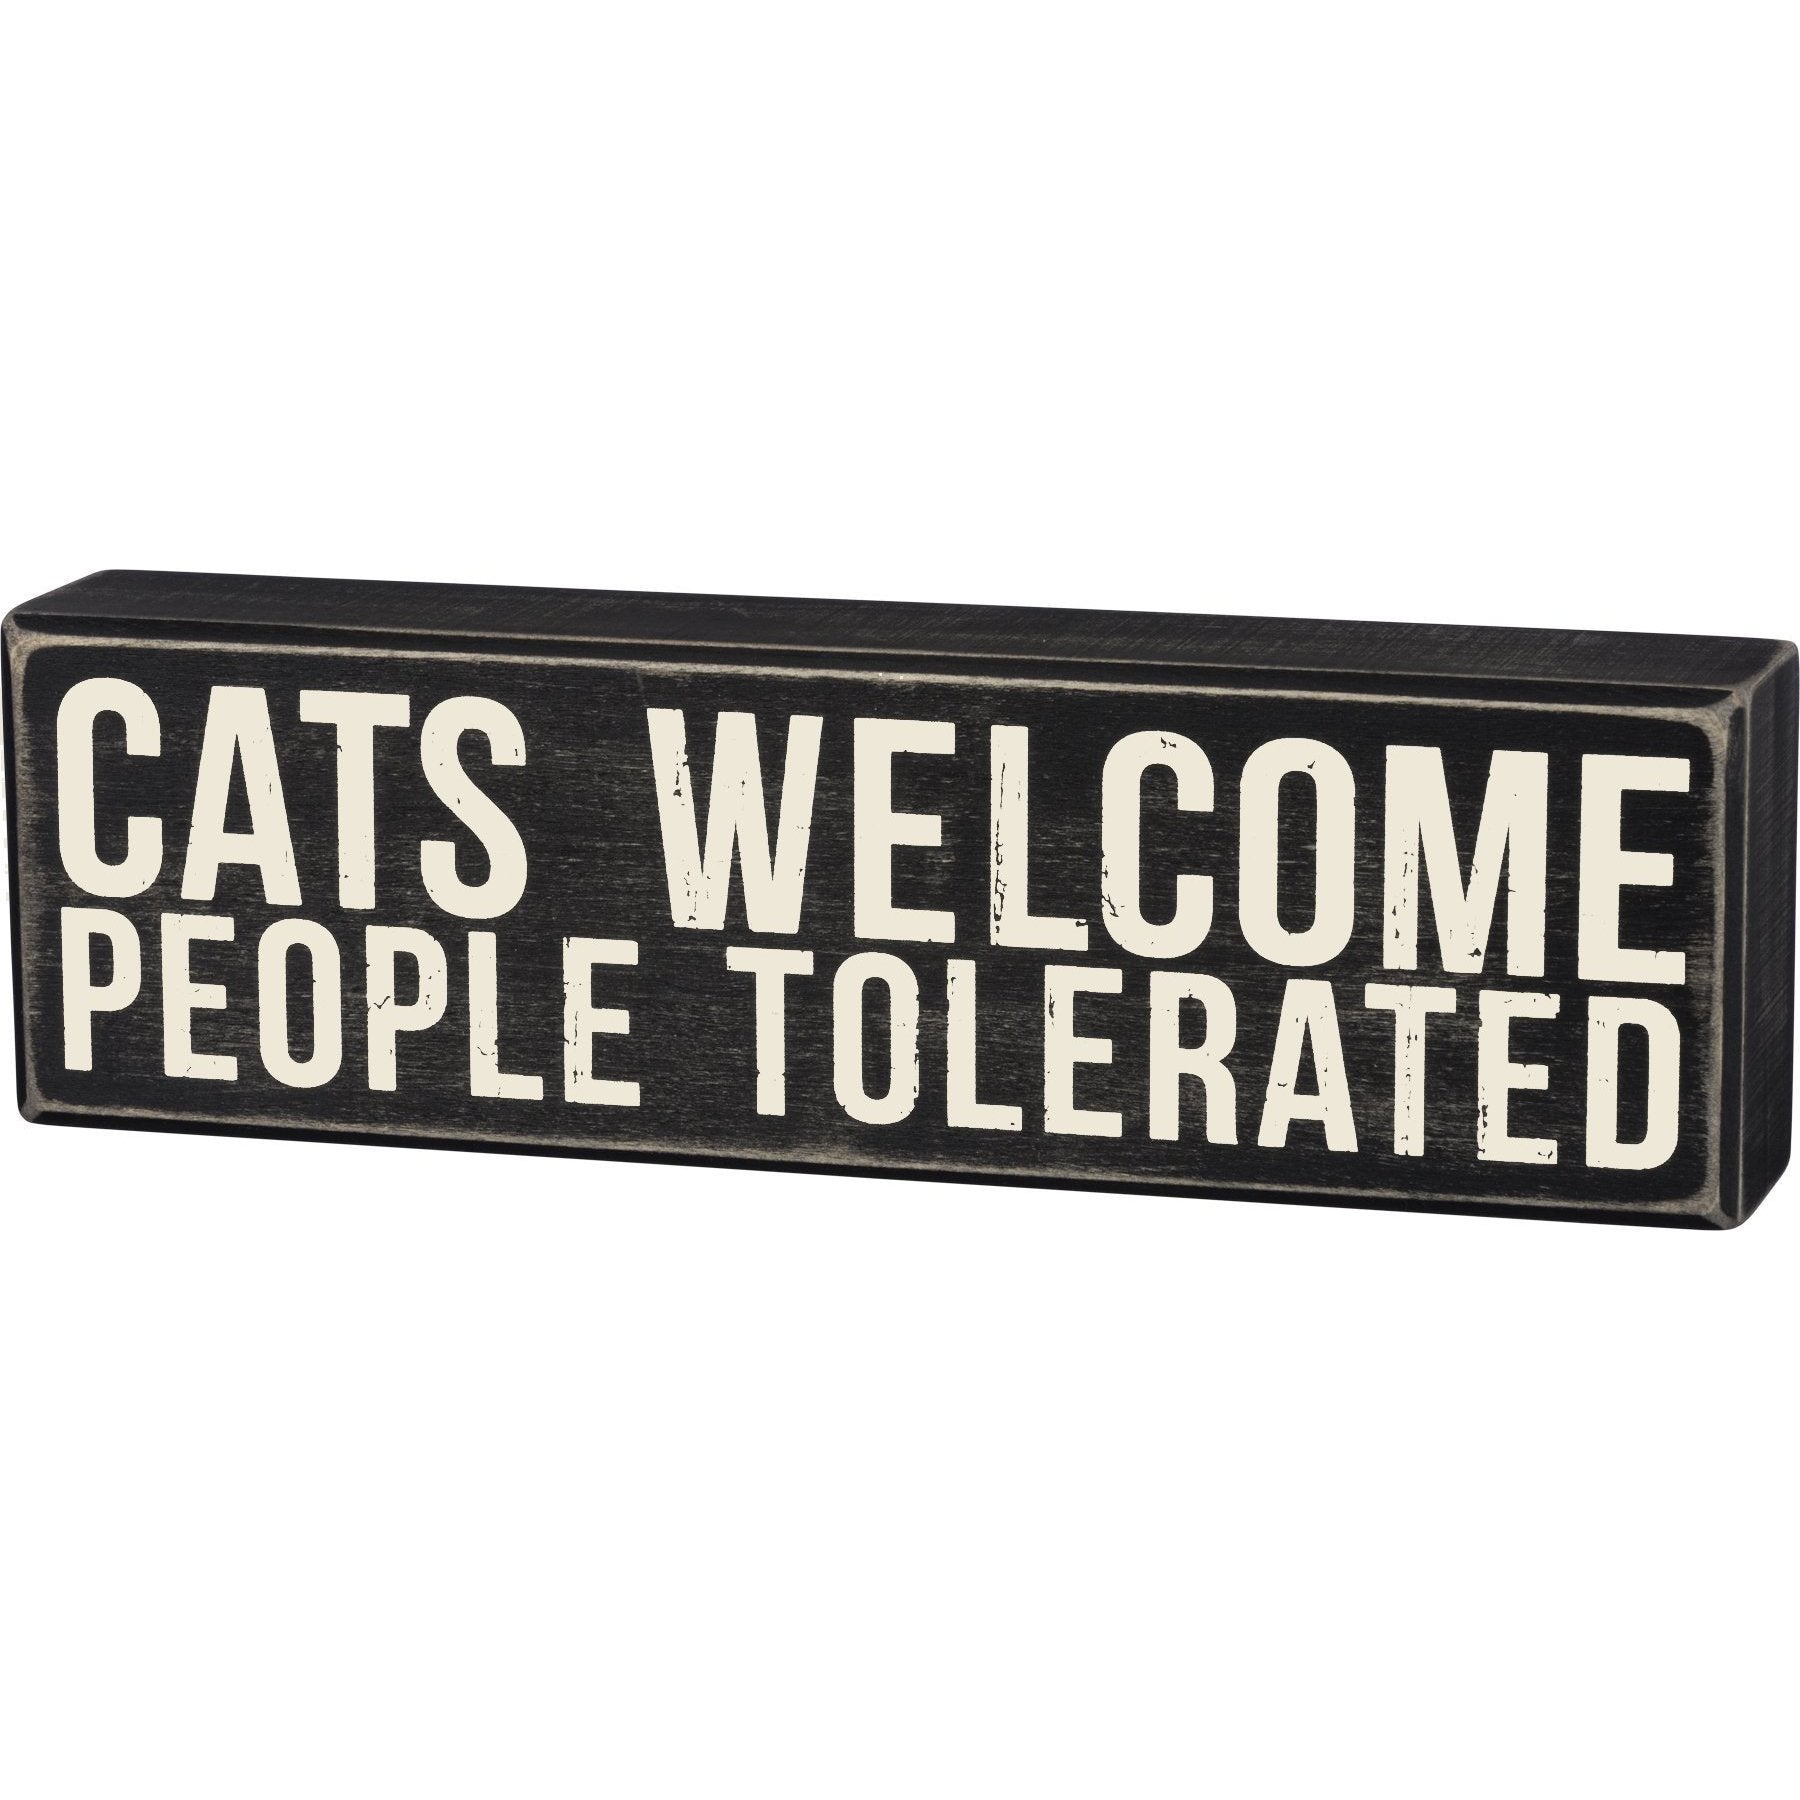 Funny Gifts for Cat People, Cats Welcome People Tolerated Funny Cat Sign